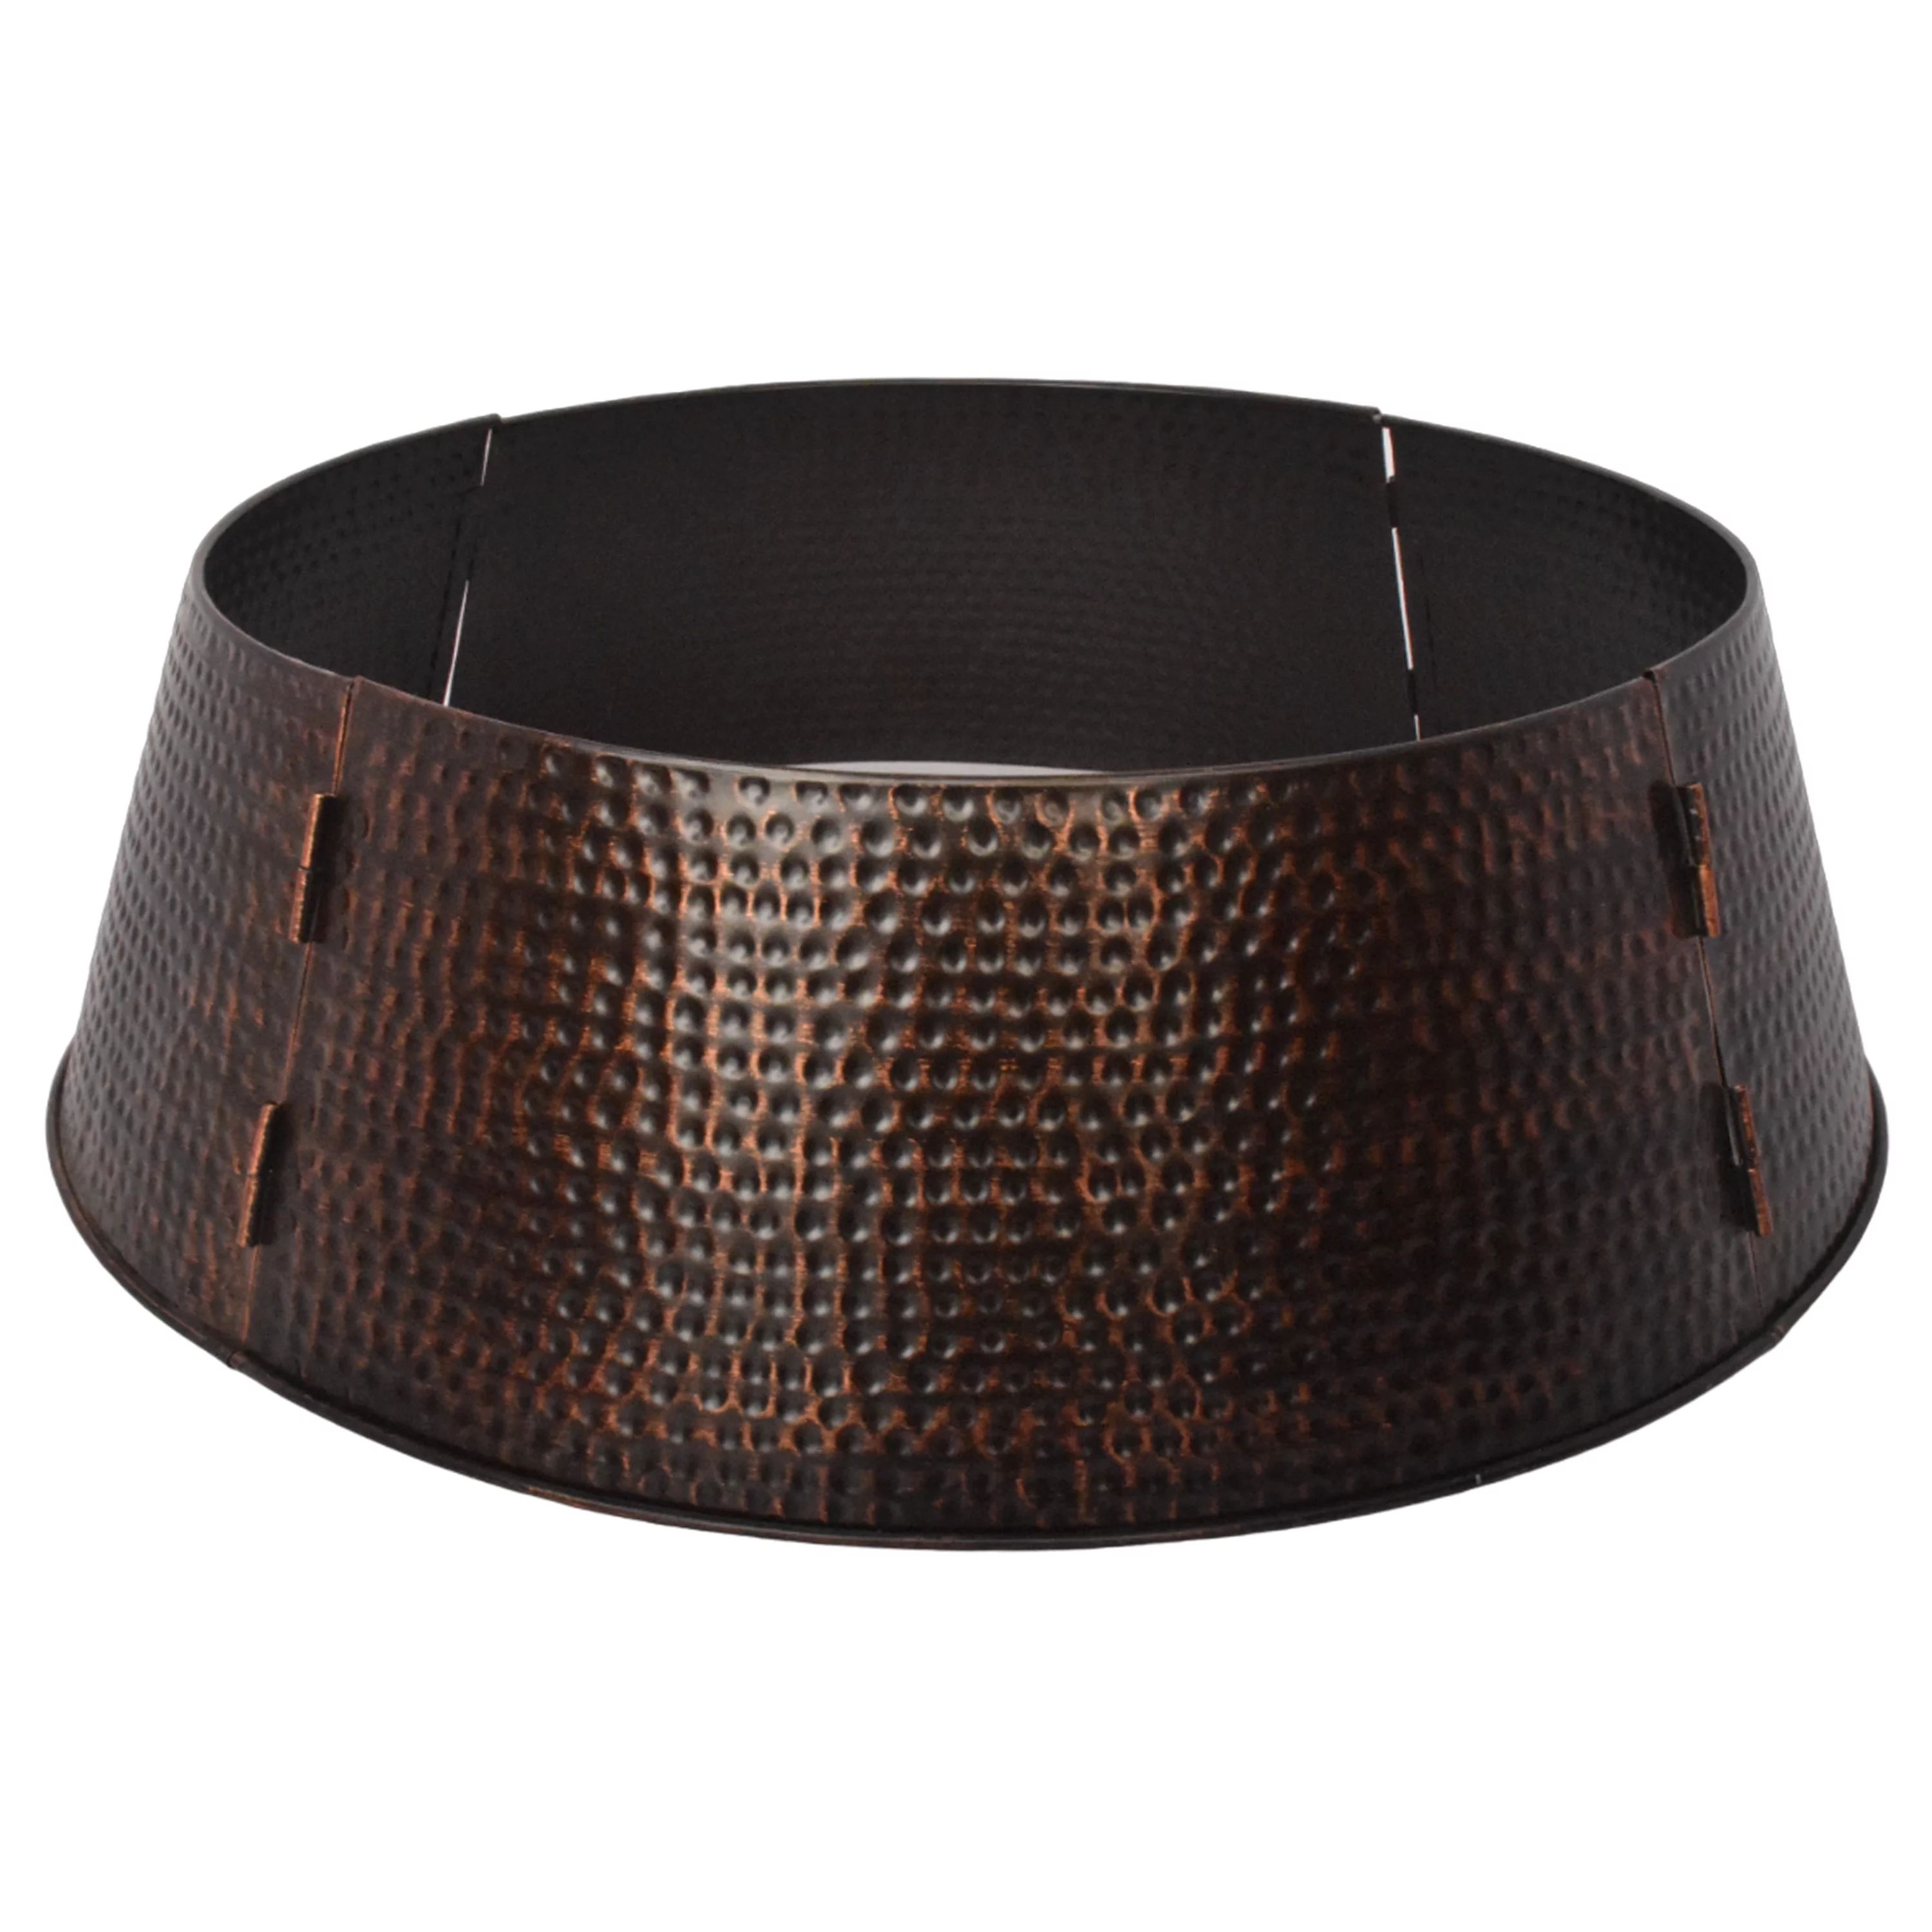 Metal Hammered Tree Collar, Brown Finish with Copper Antique, 27" x 27" x 8", by Holiday Time | Walmart (US)